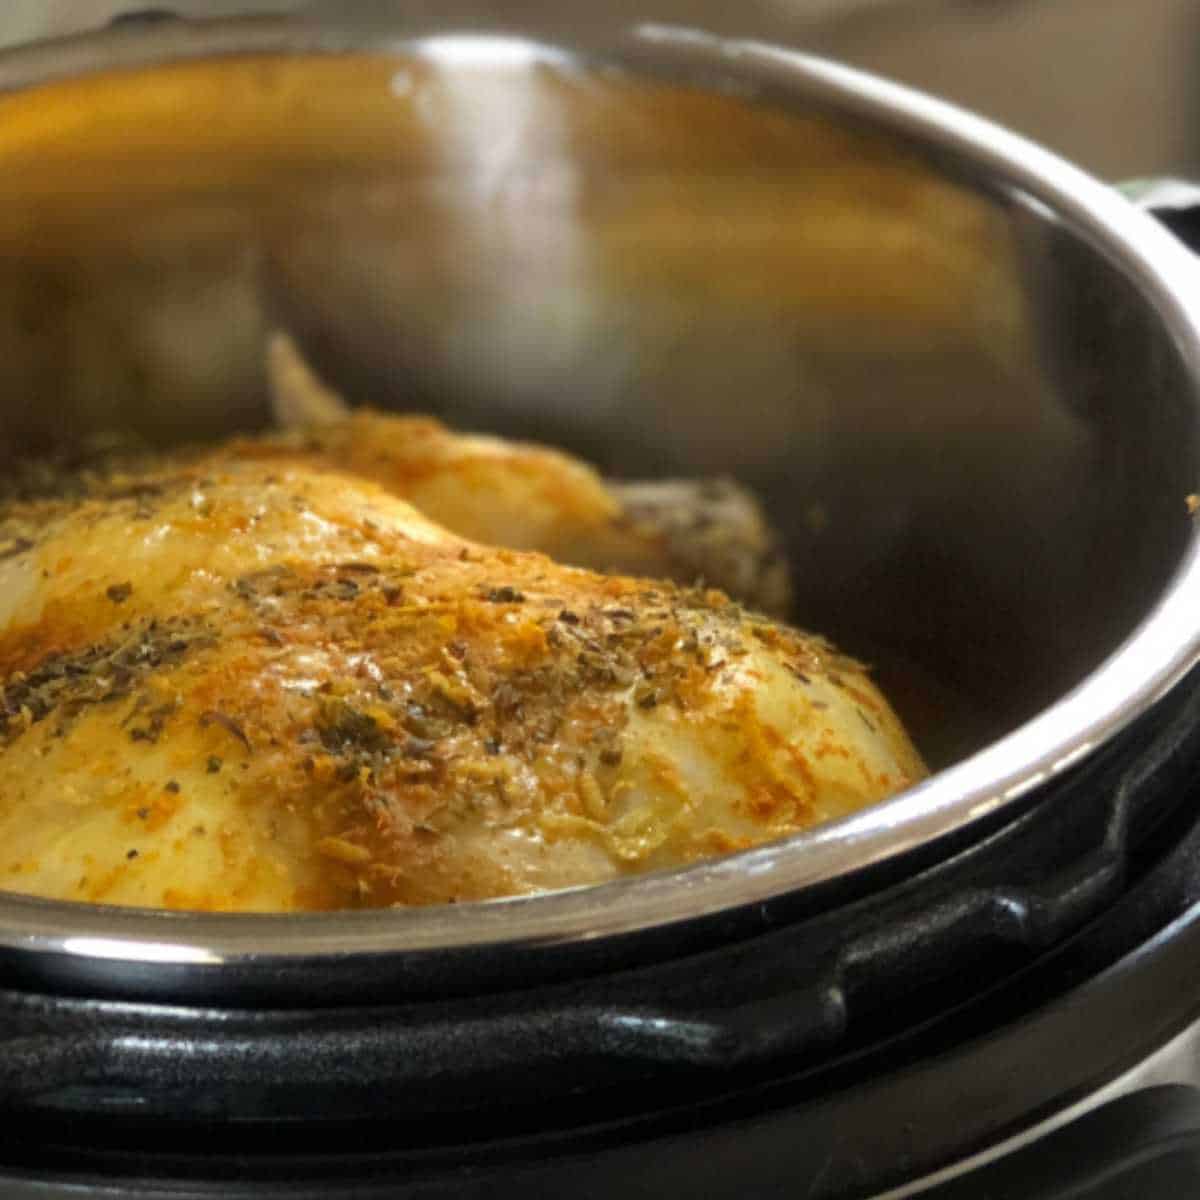 Photo of the lemony whole chicken seen inside the Instant Pot